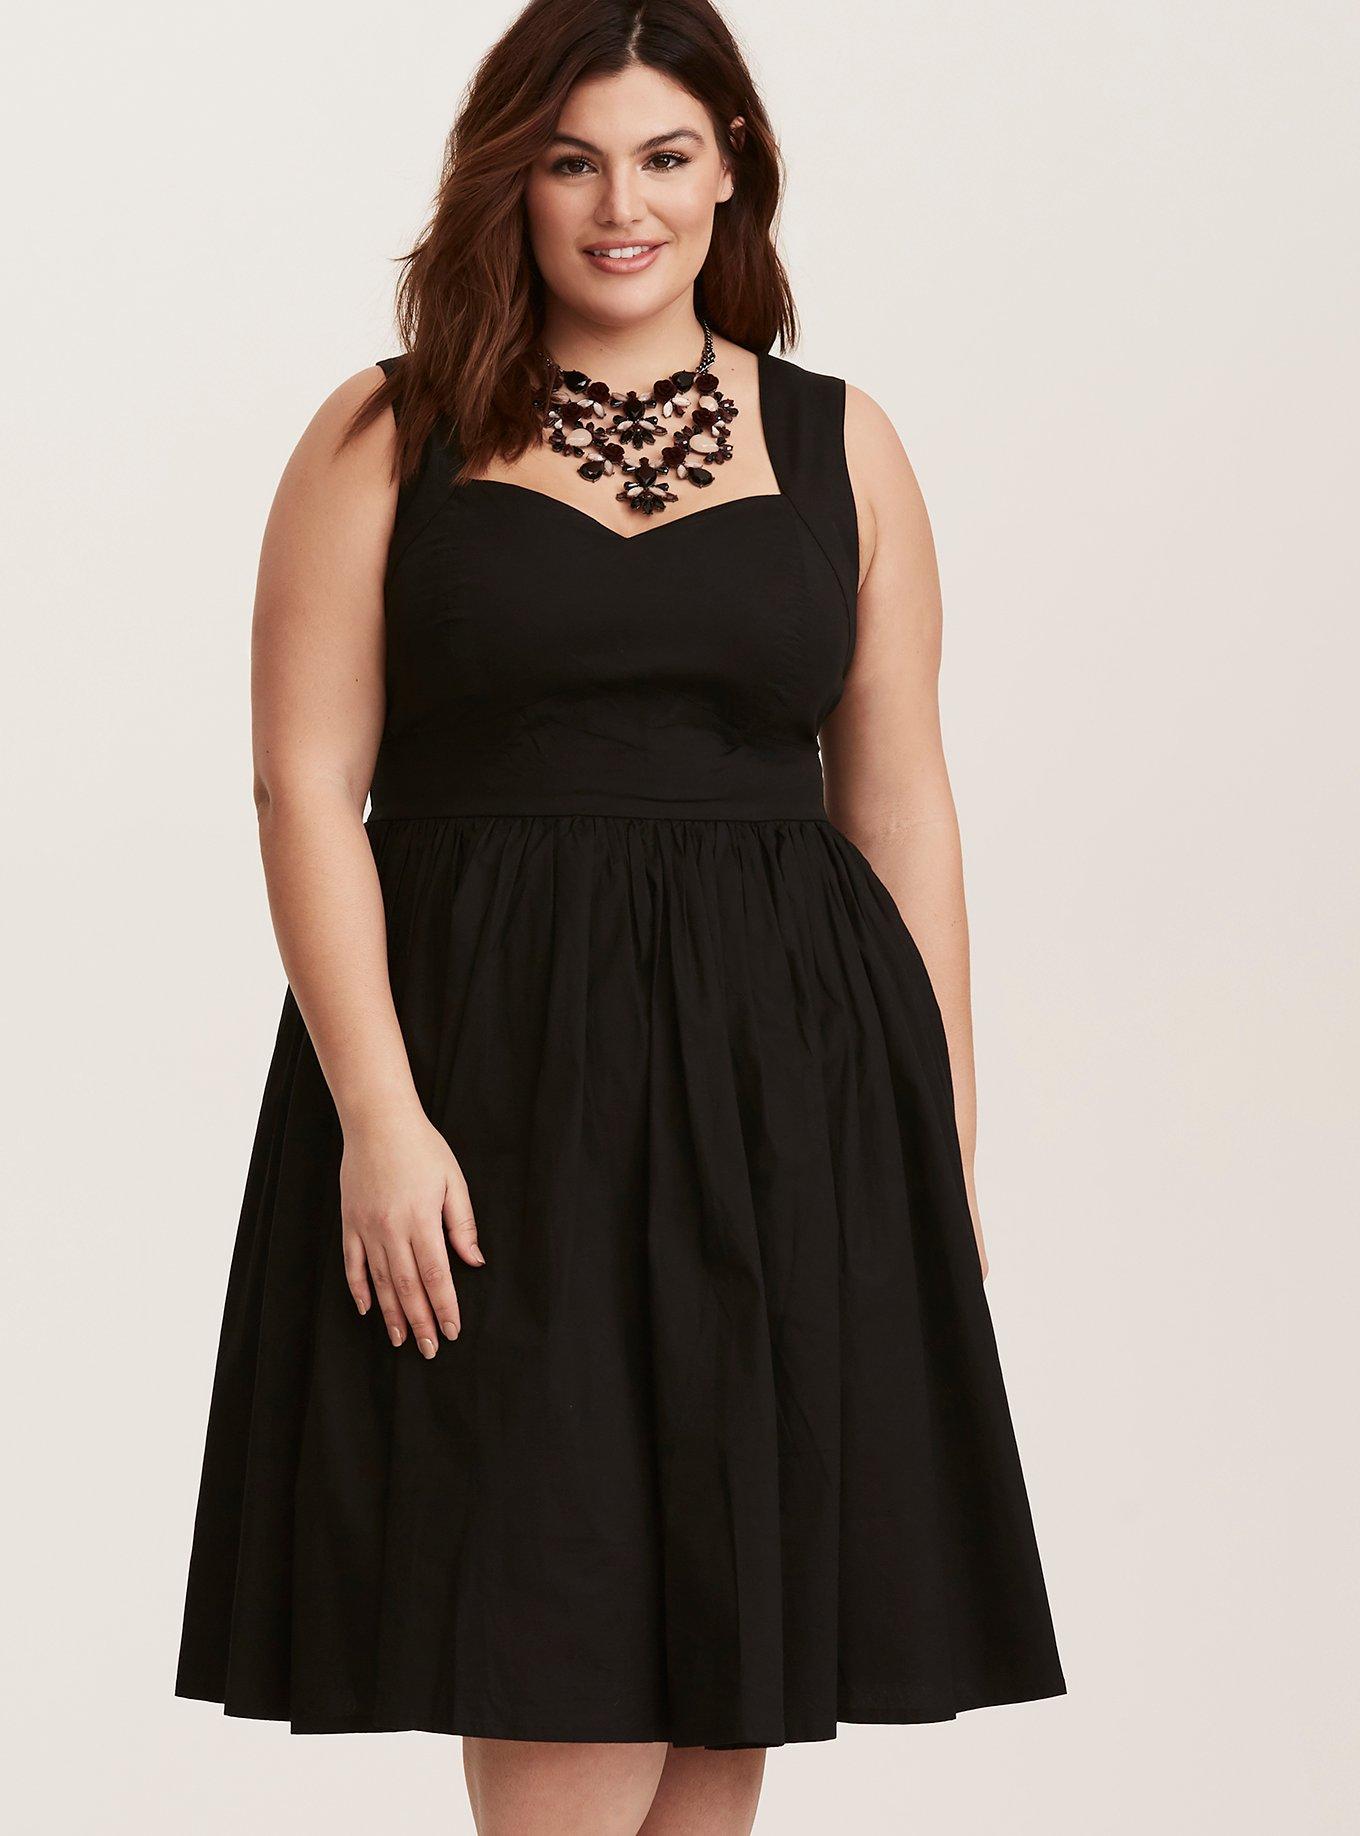 Torrid Plus Size Women's Clothing for sale in Copiague, New York